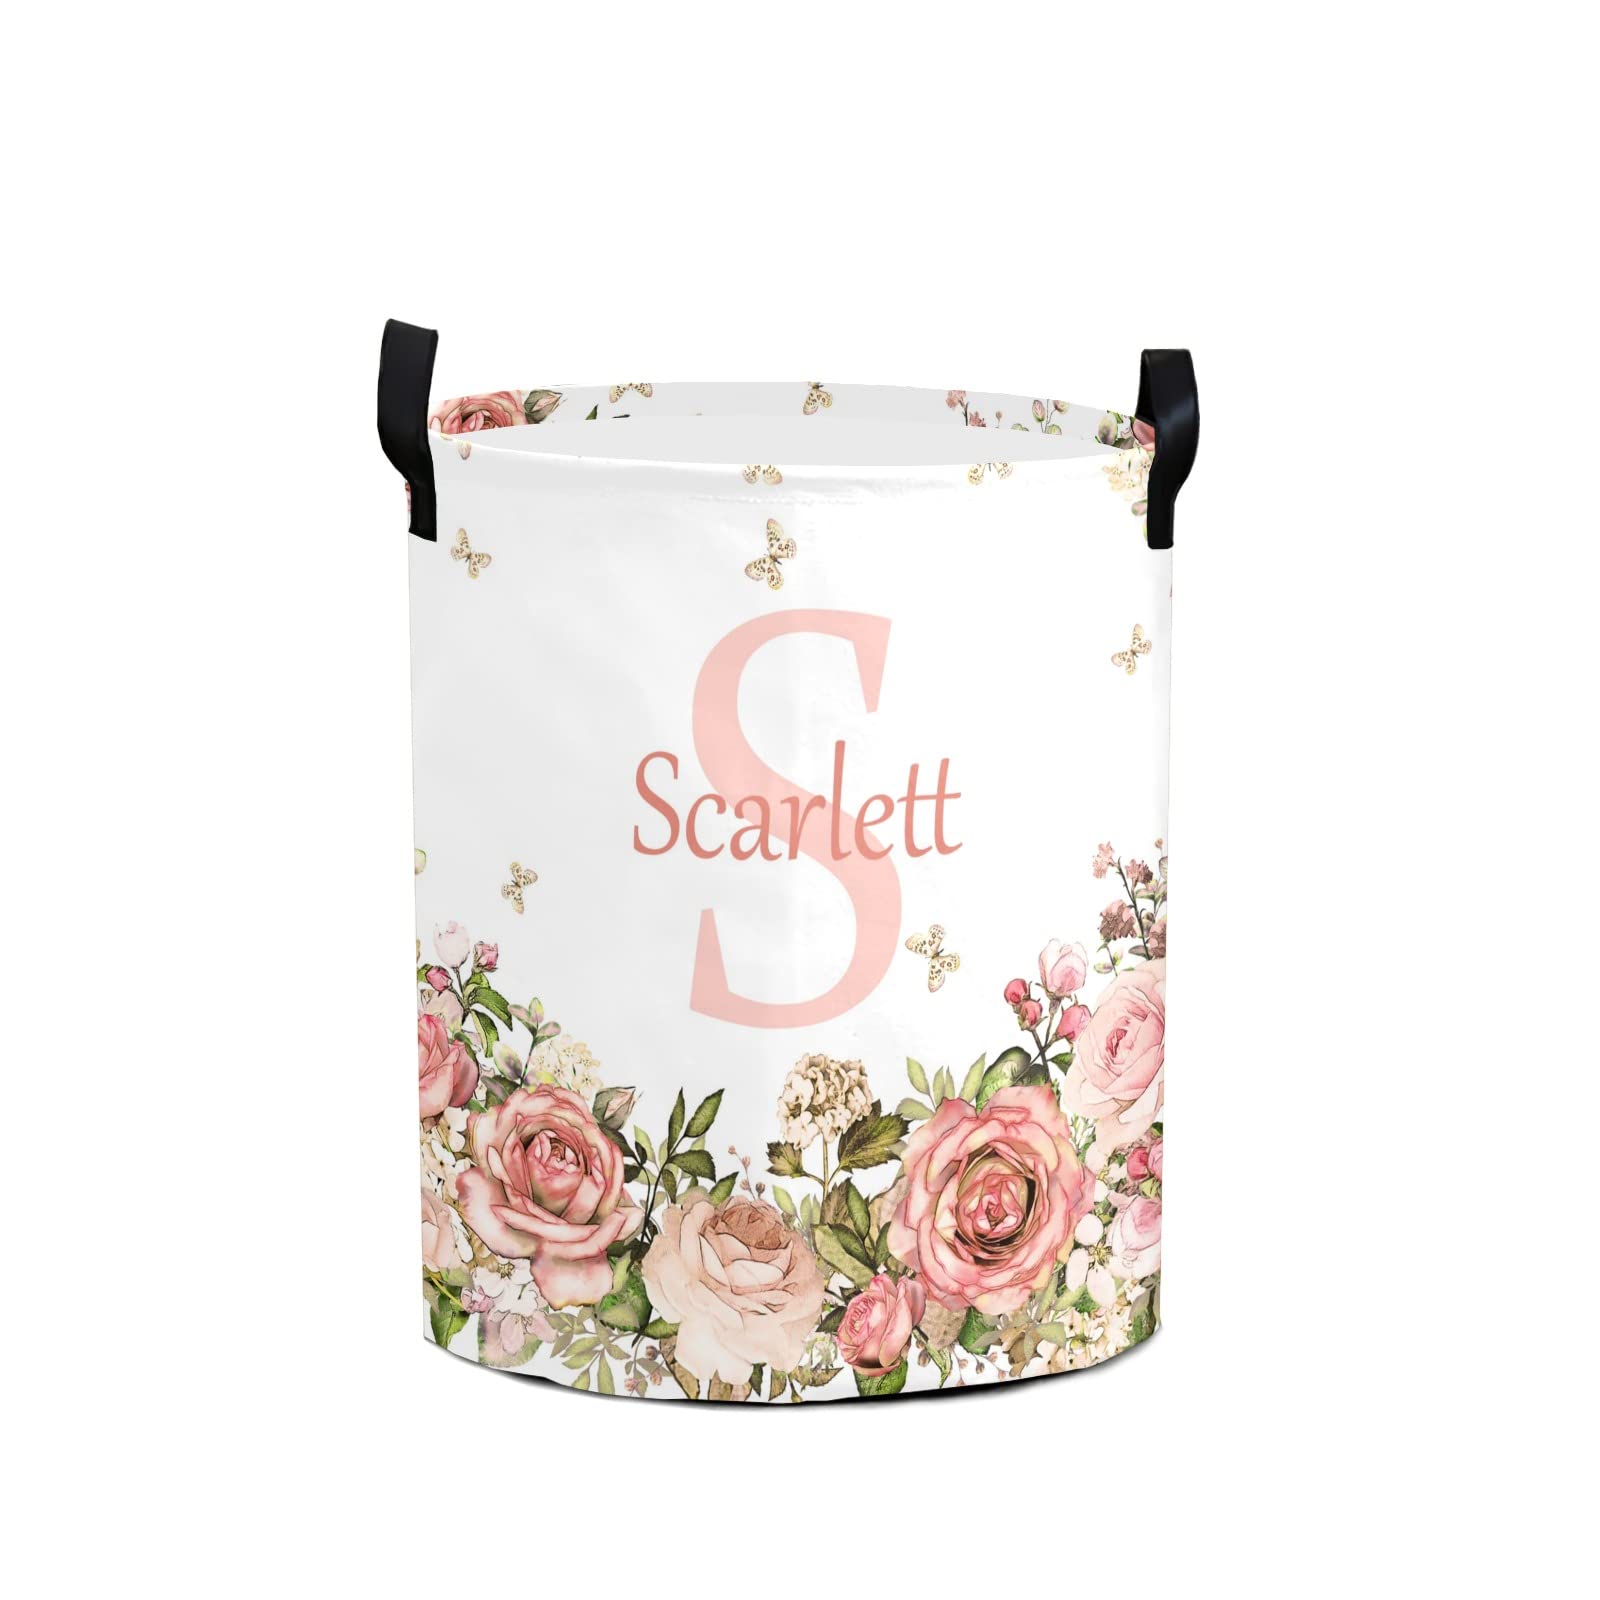 Personalized Kids Collapsible Laundry Hamper Custom Foldable Baby Girls Laundry Basket with Names Custoized Nursery Hamper for Girls Pink Floral